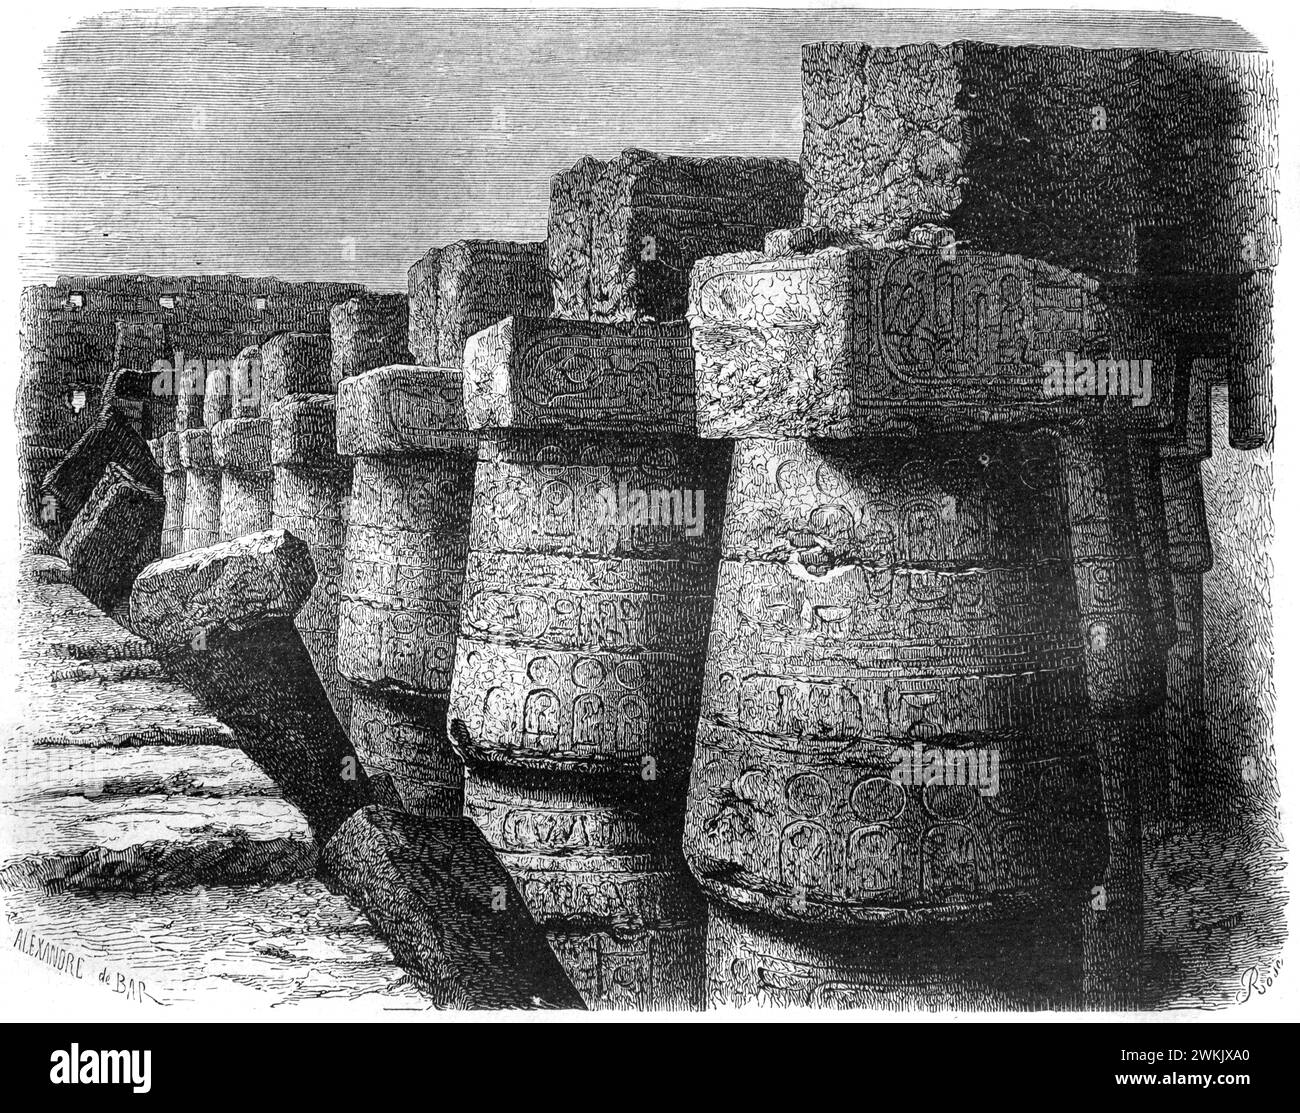 Massive Stone Columns with Hieroglphic Motifs in the Ancient Ruins at the Karnak Temple Complex El-Karnak Luxur Egypt. Vintage or Historic Engraving or Illustration 1963. Stock Photo